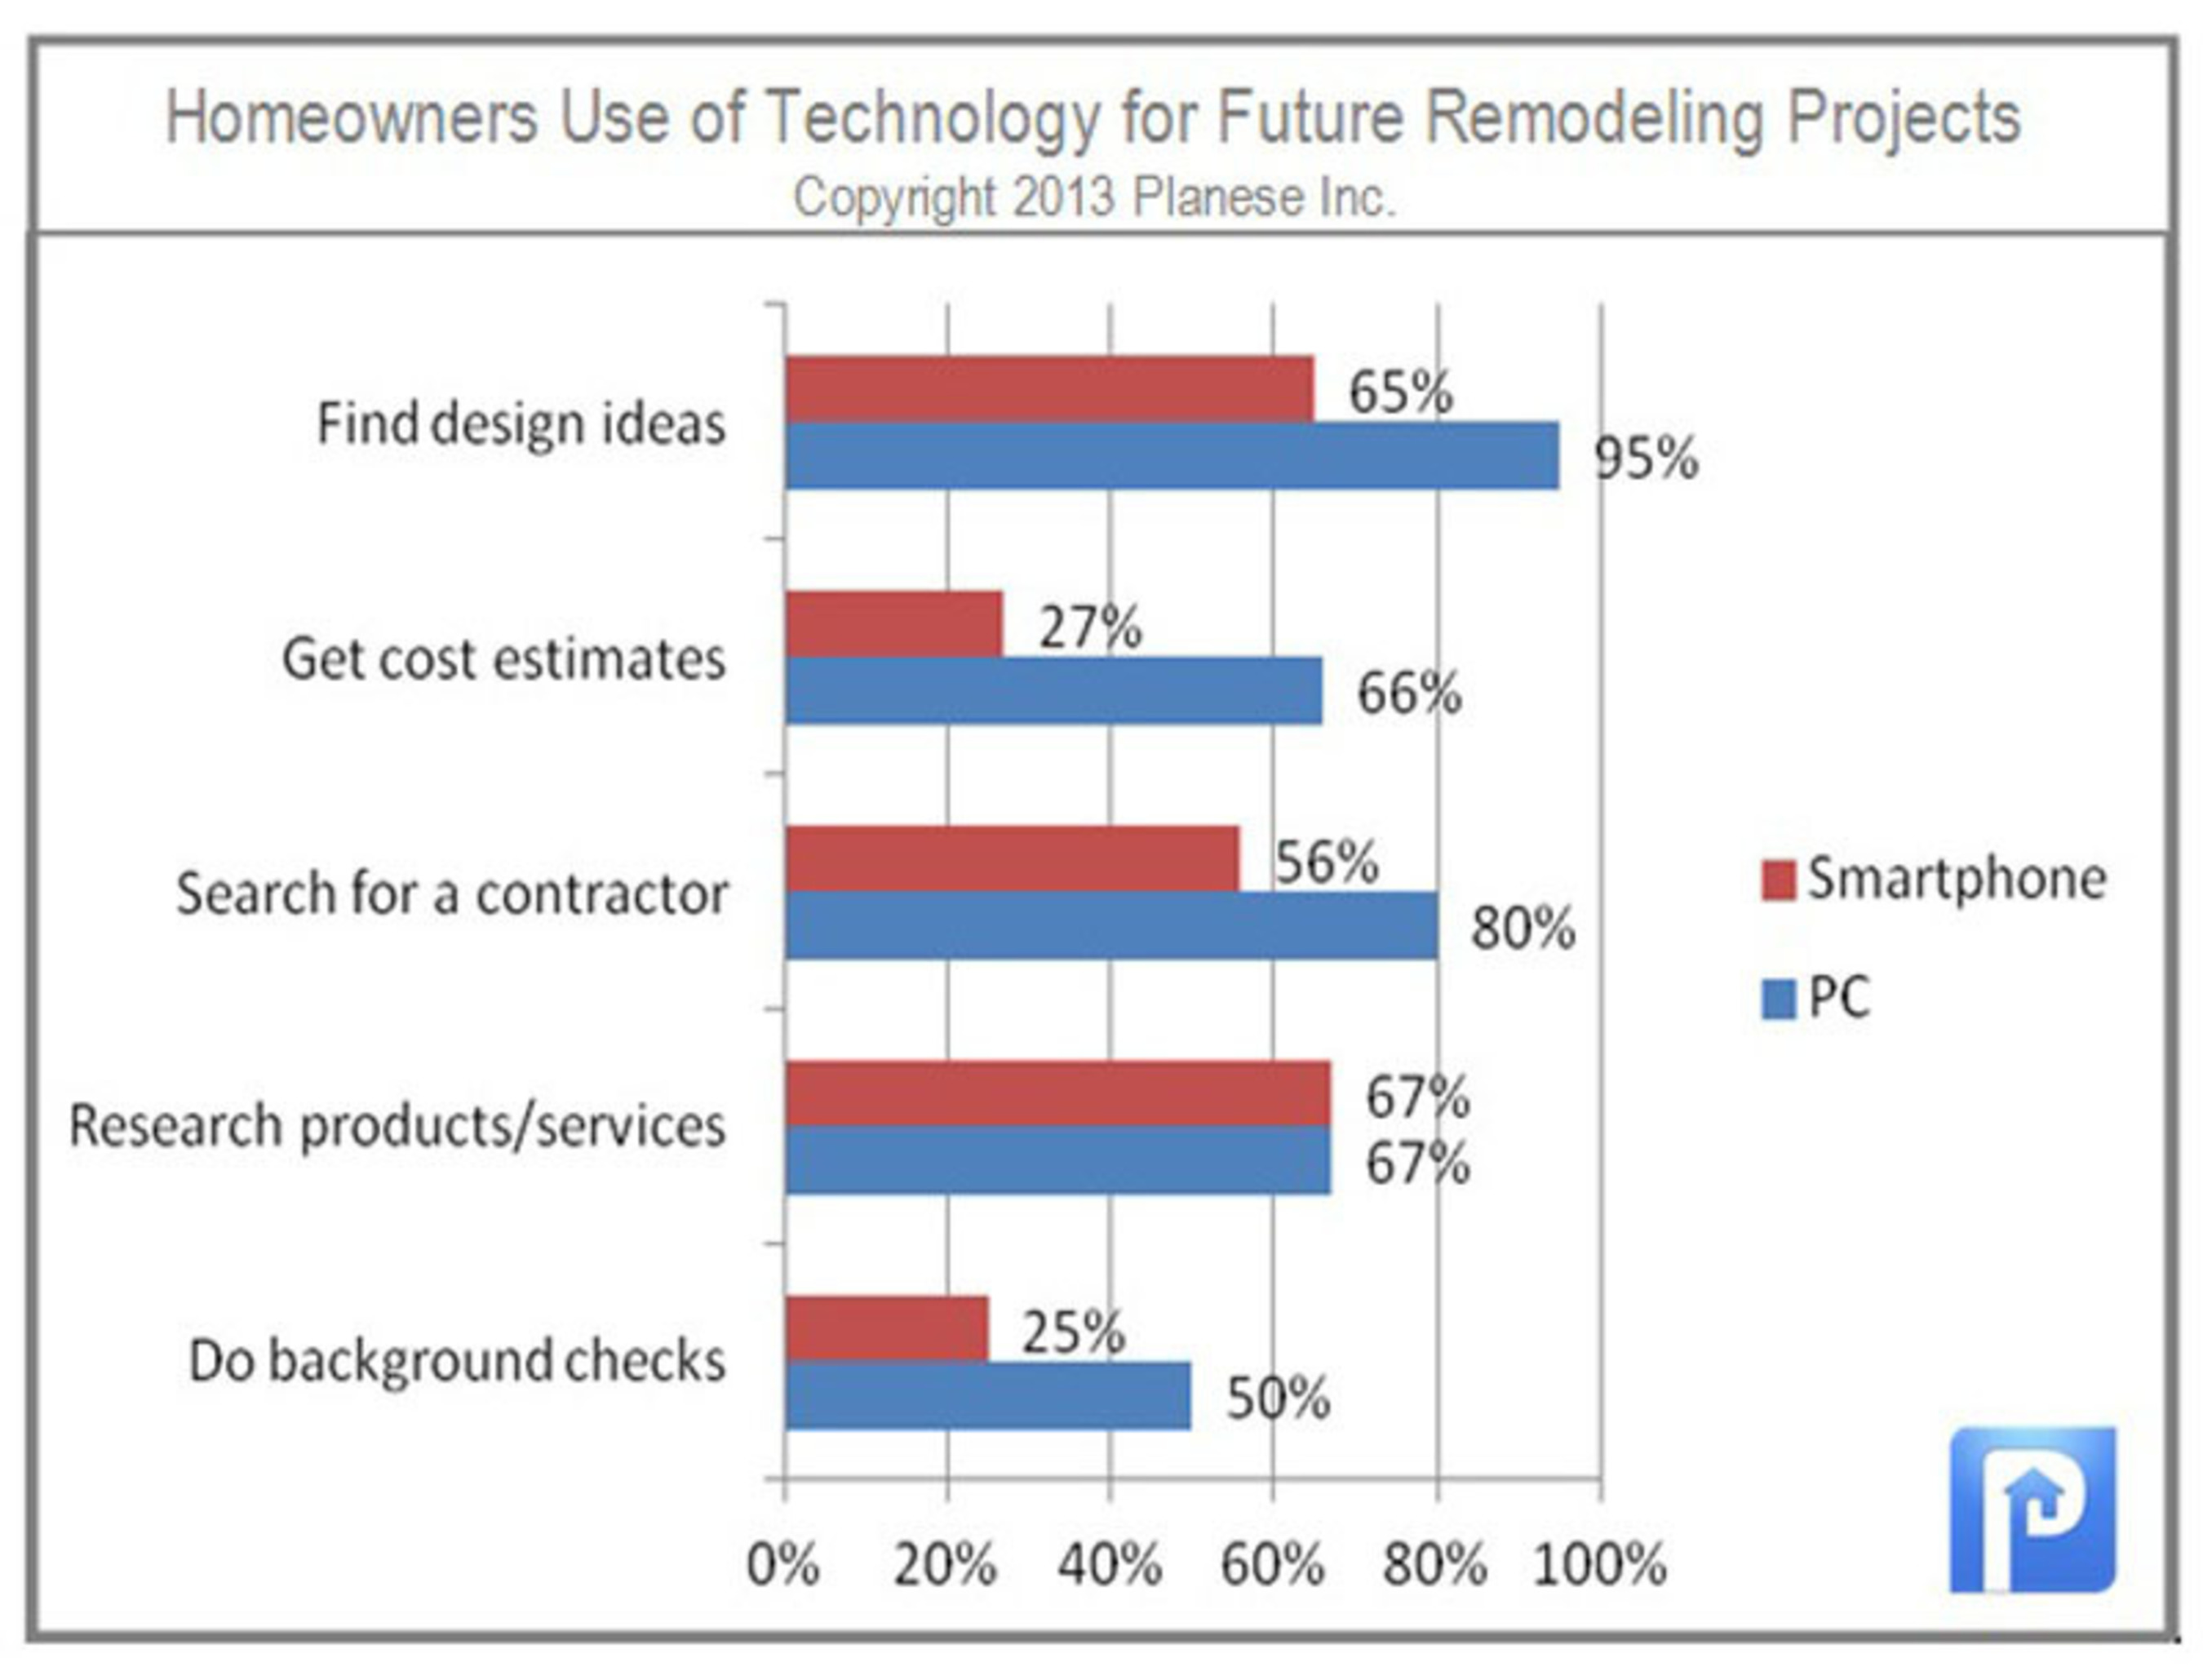 Homeowners Use of Technology for Future Remodeling Projects. (PRNewsFoto/Planese) (PRNewsFoto/PLANESE)